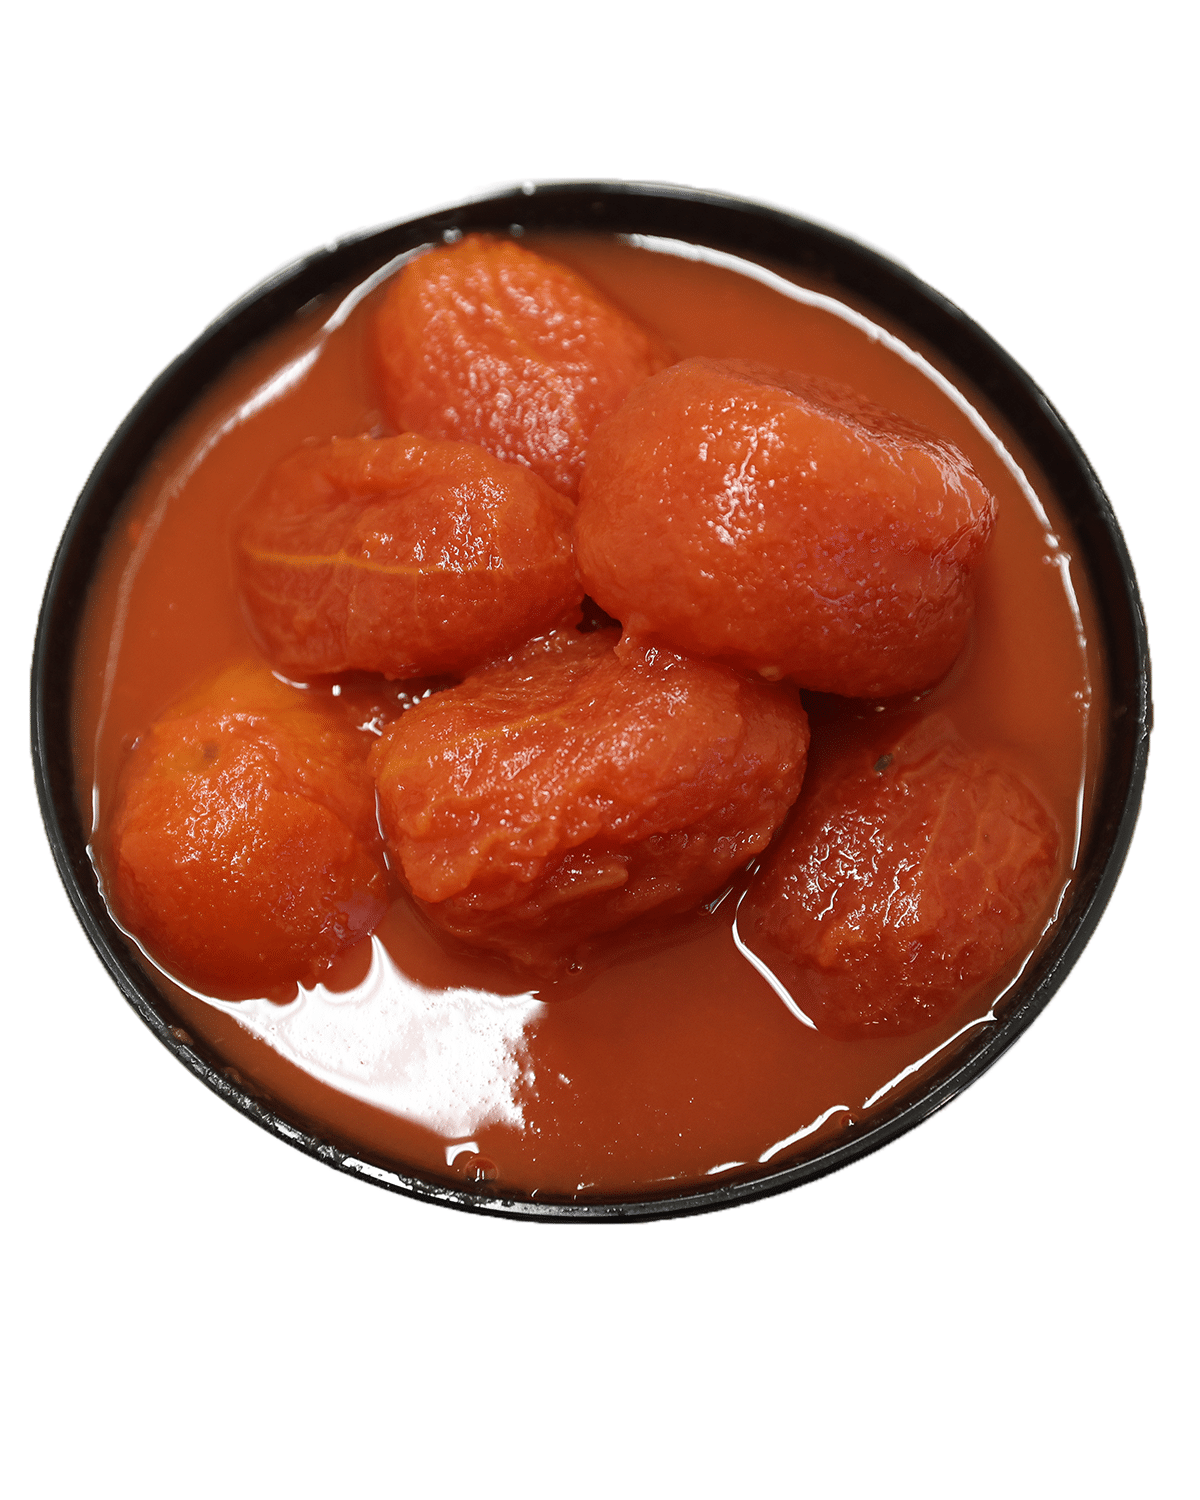 A bowl of ripe apricots on a white background.